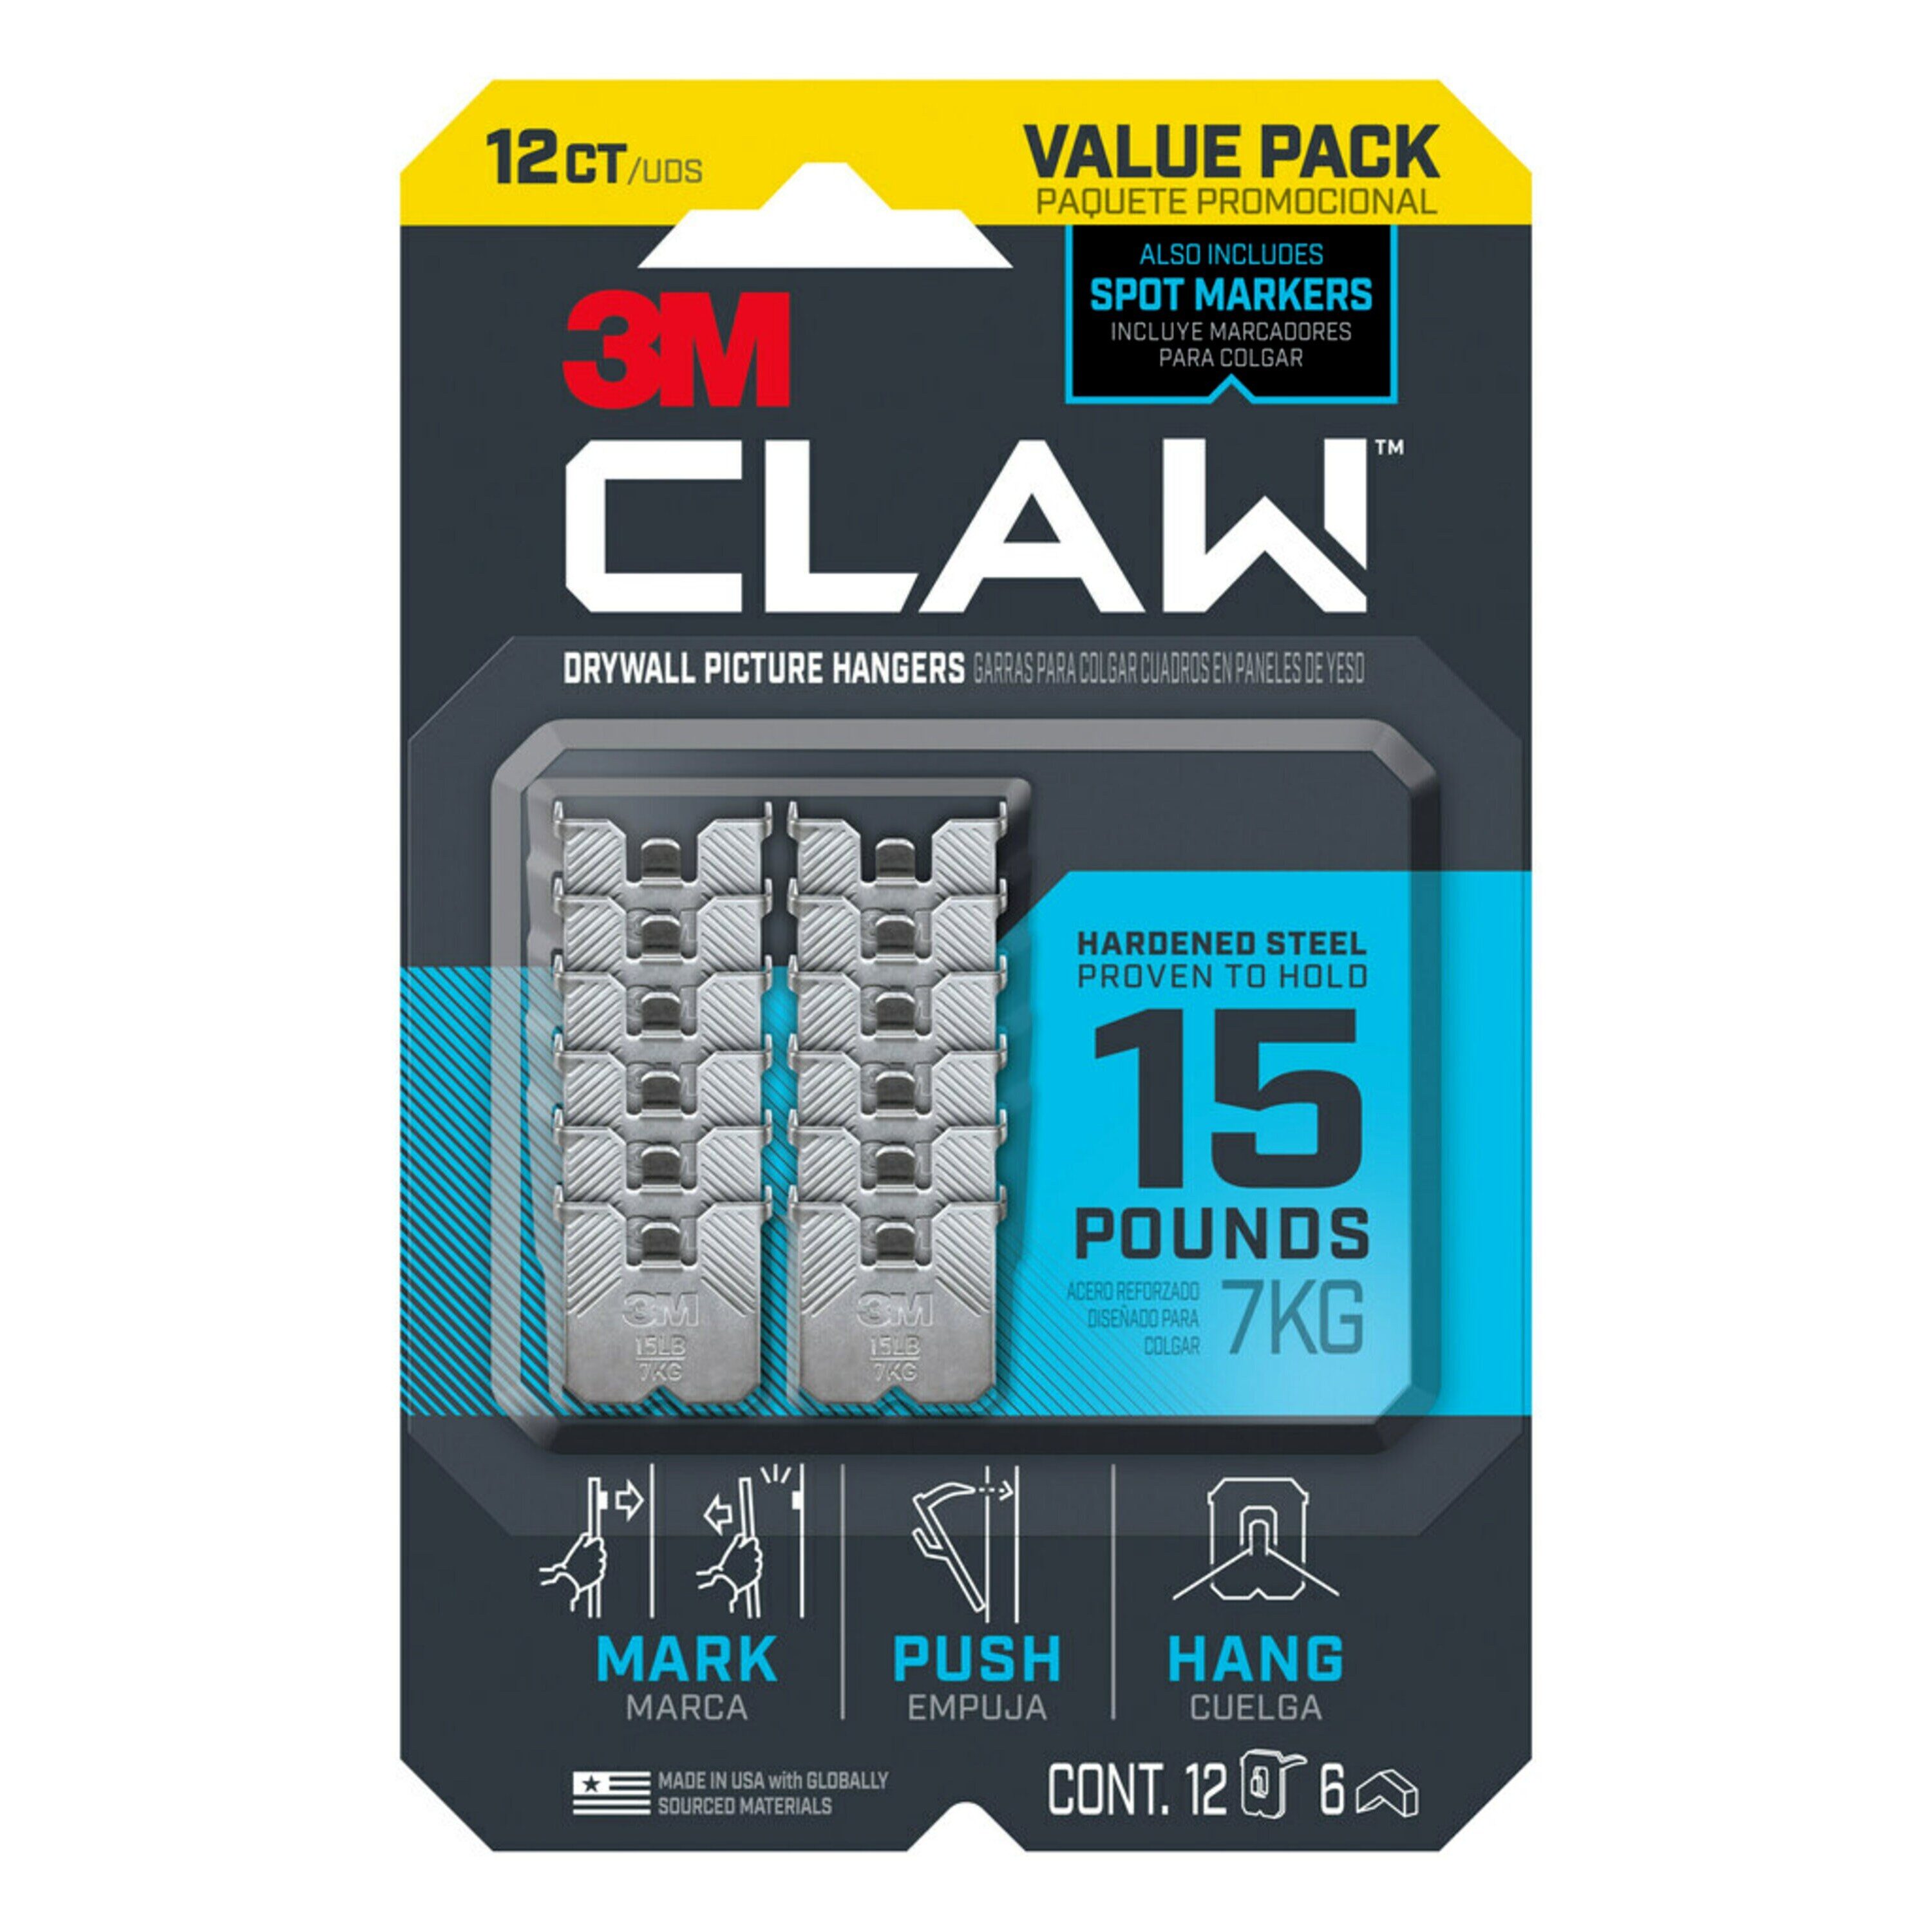 3M 3m Claw Drywall Picture Hangers 45lb with Temporary Spot Markers  3ph45m-8es, 8 Hangers, 4 Markers in the Picture Hangers department at